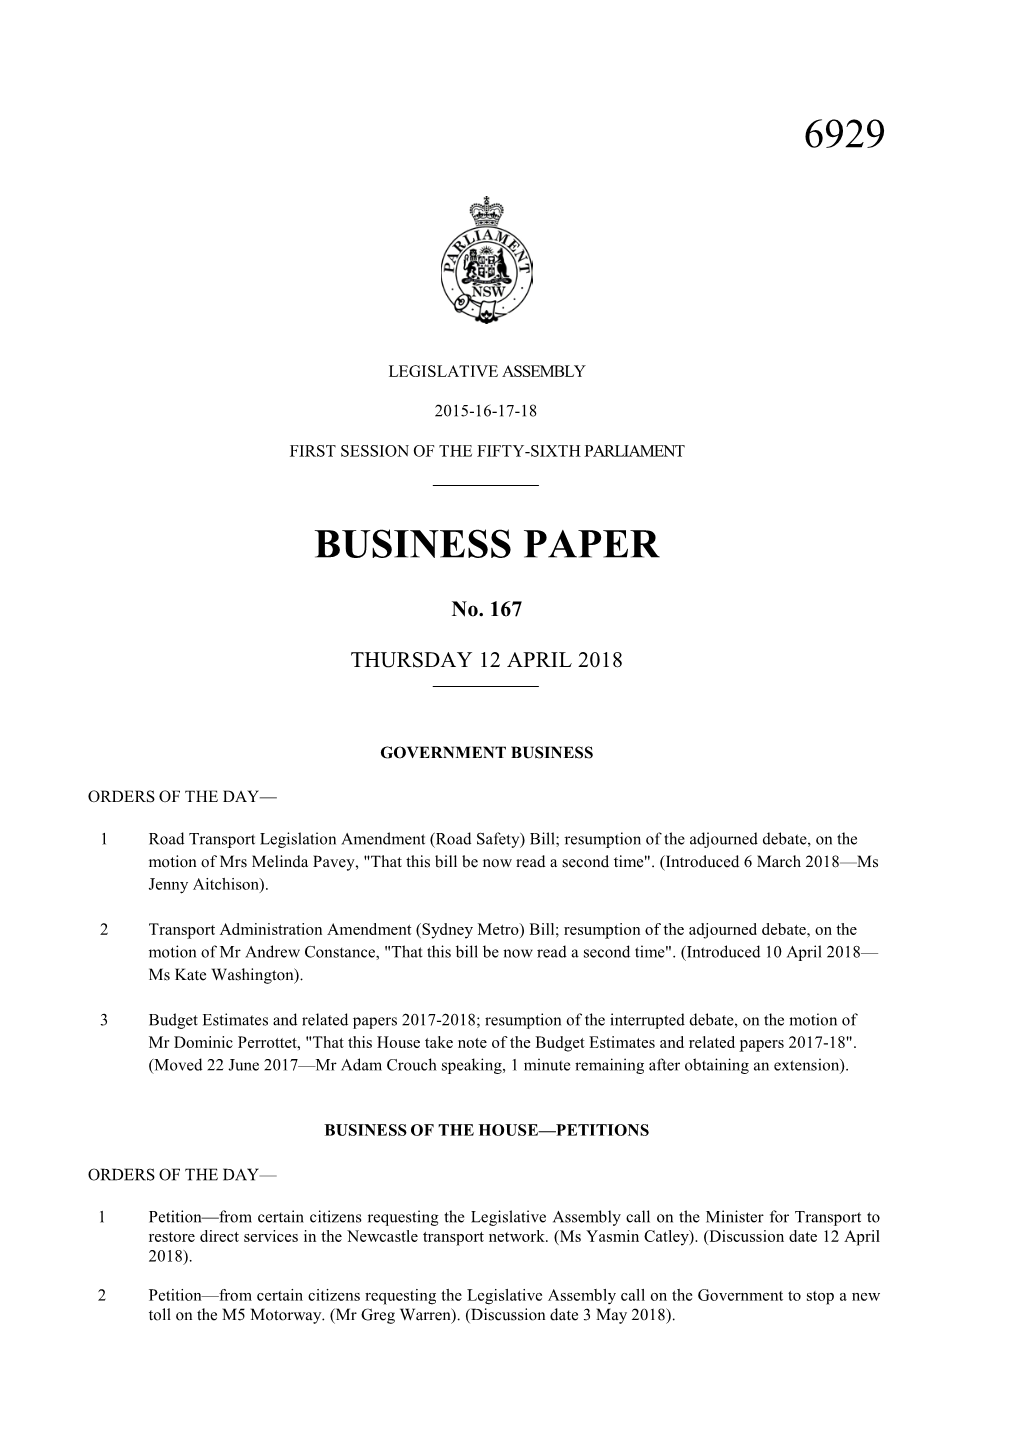 6929 Business Paper